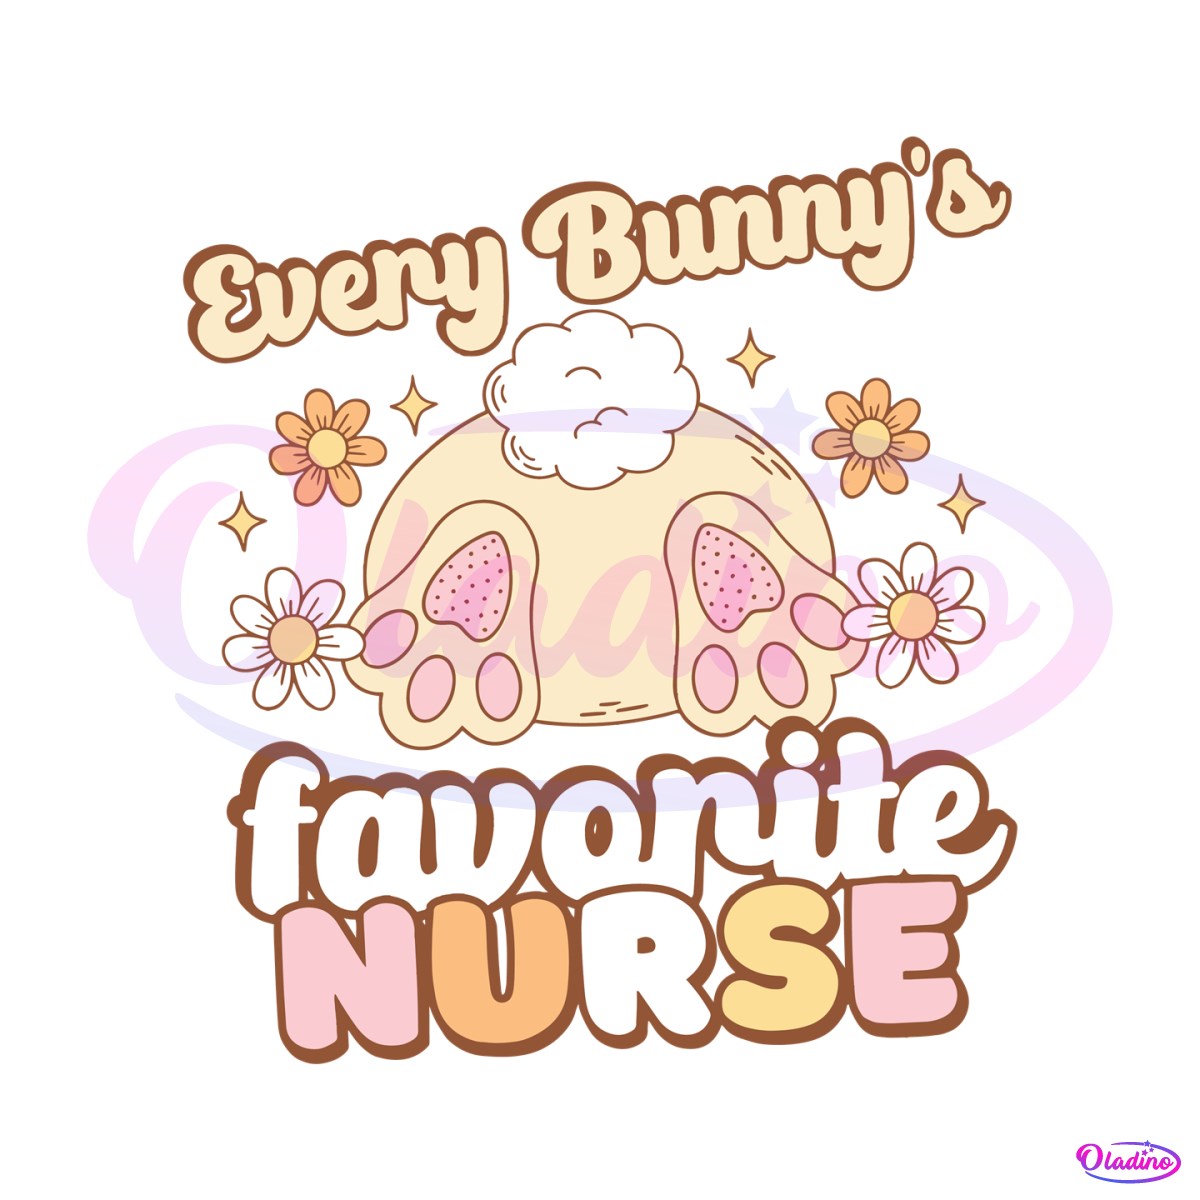 every-bunnys-favorite-nurse-easter-day-svg